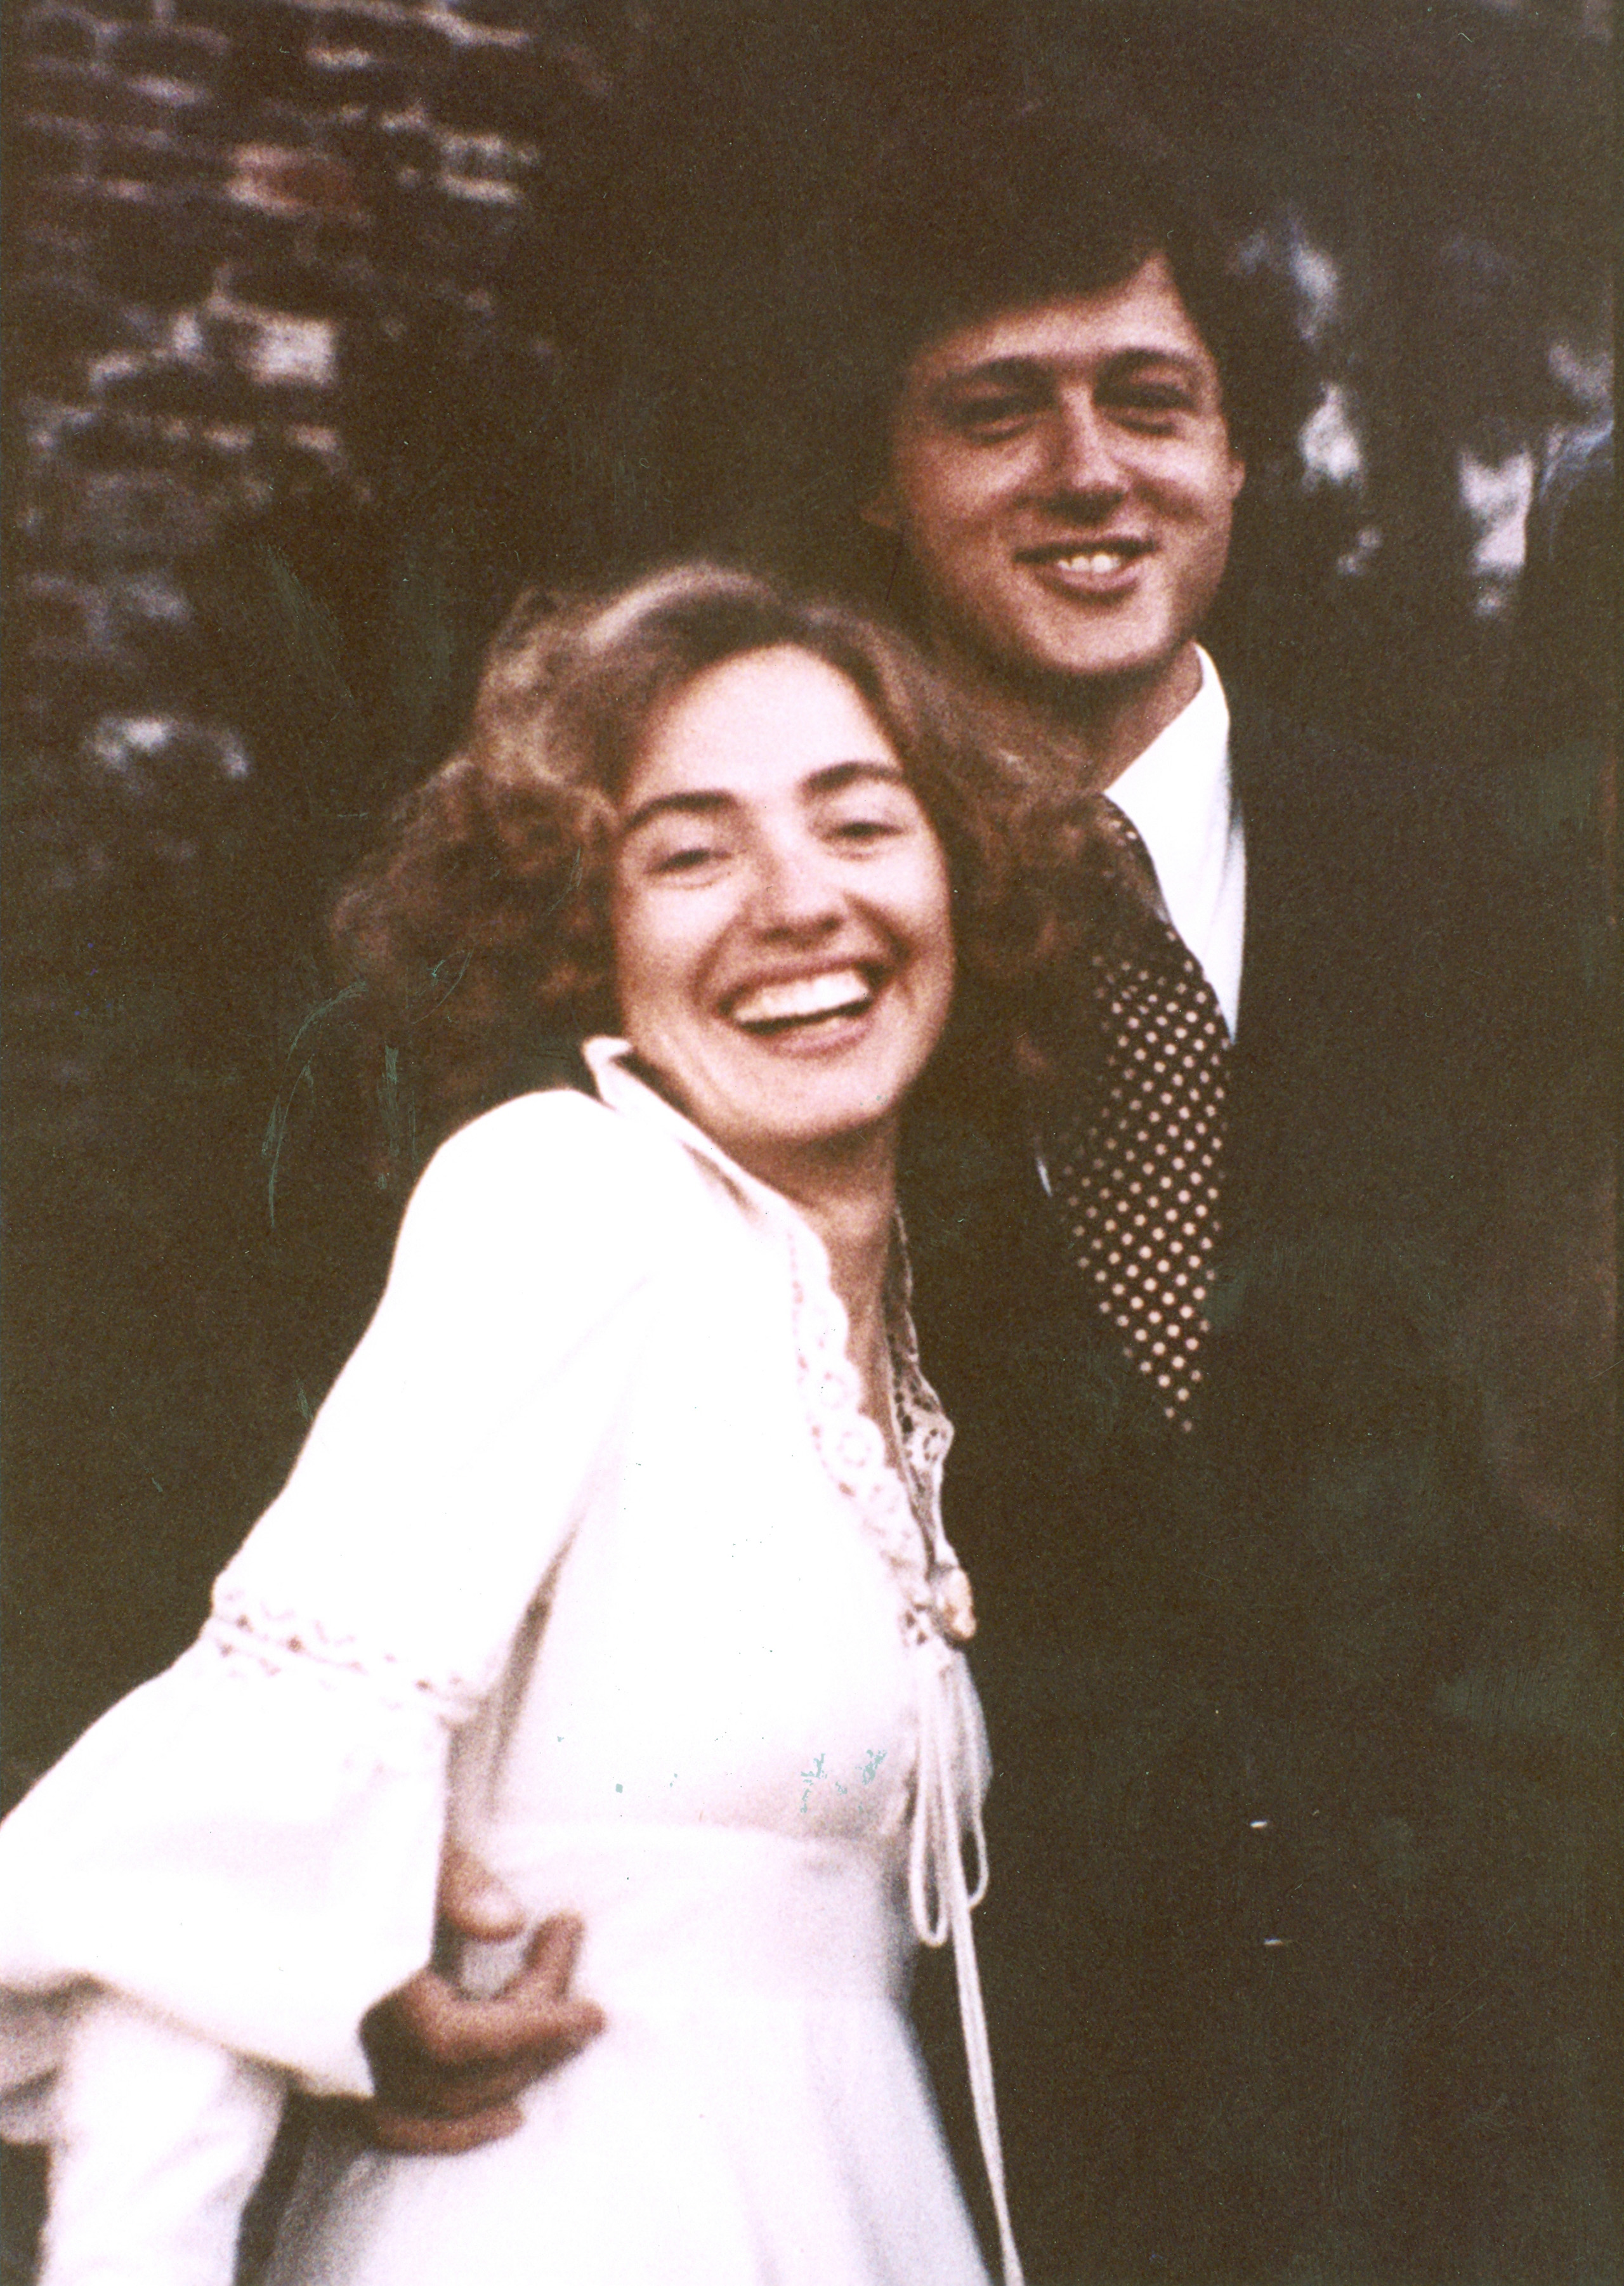 Hillary and Bill on their wedding day, October 11, 1975.